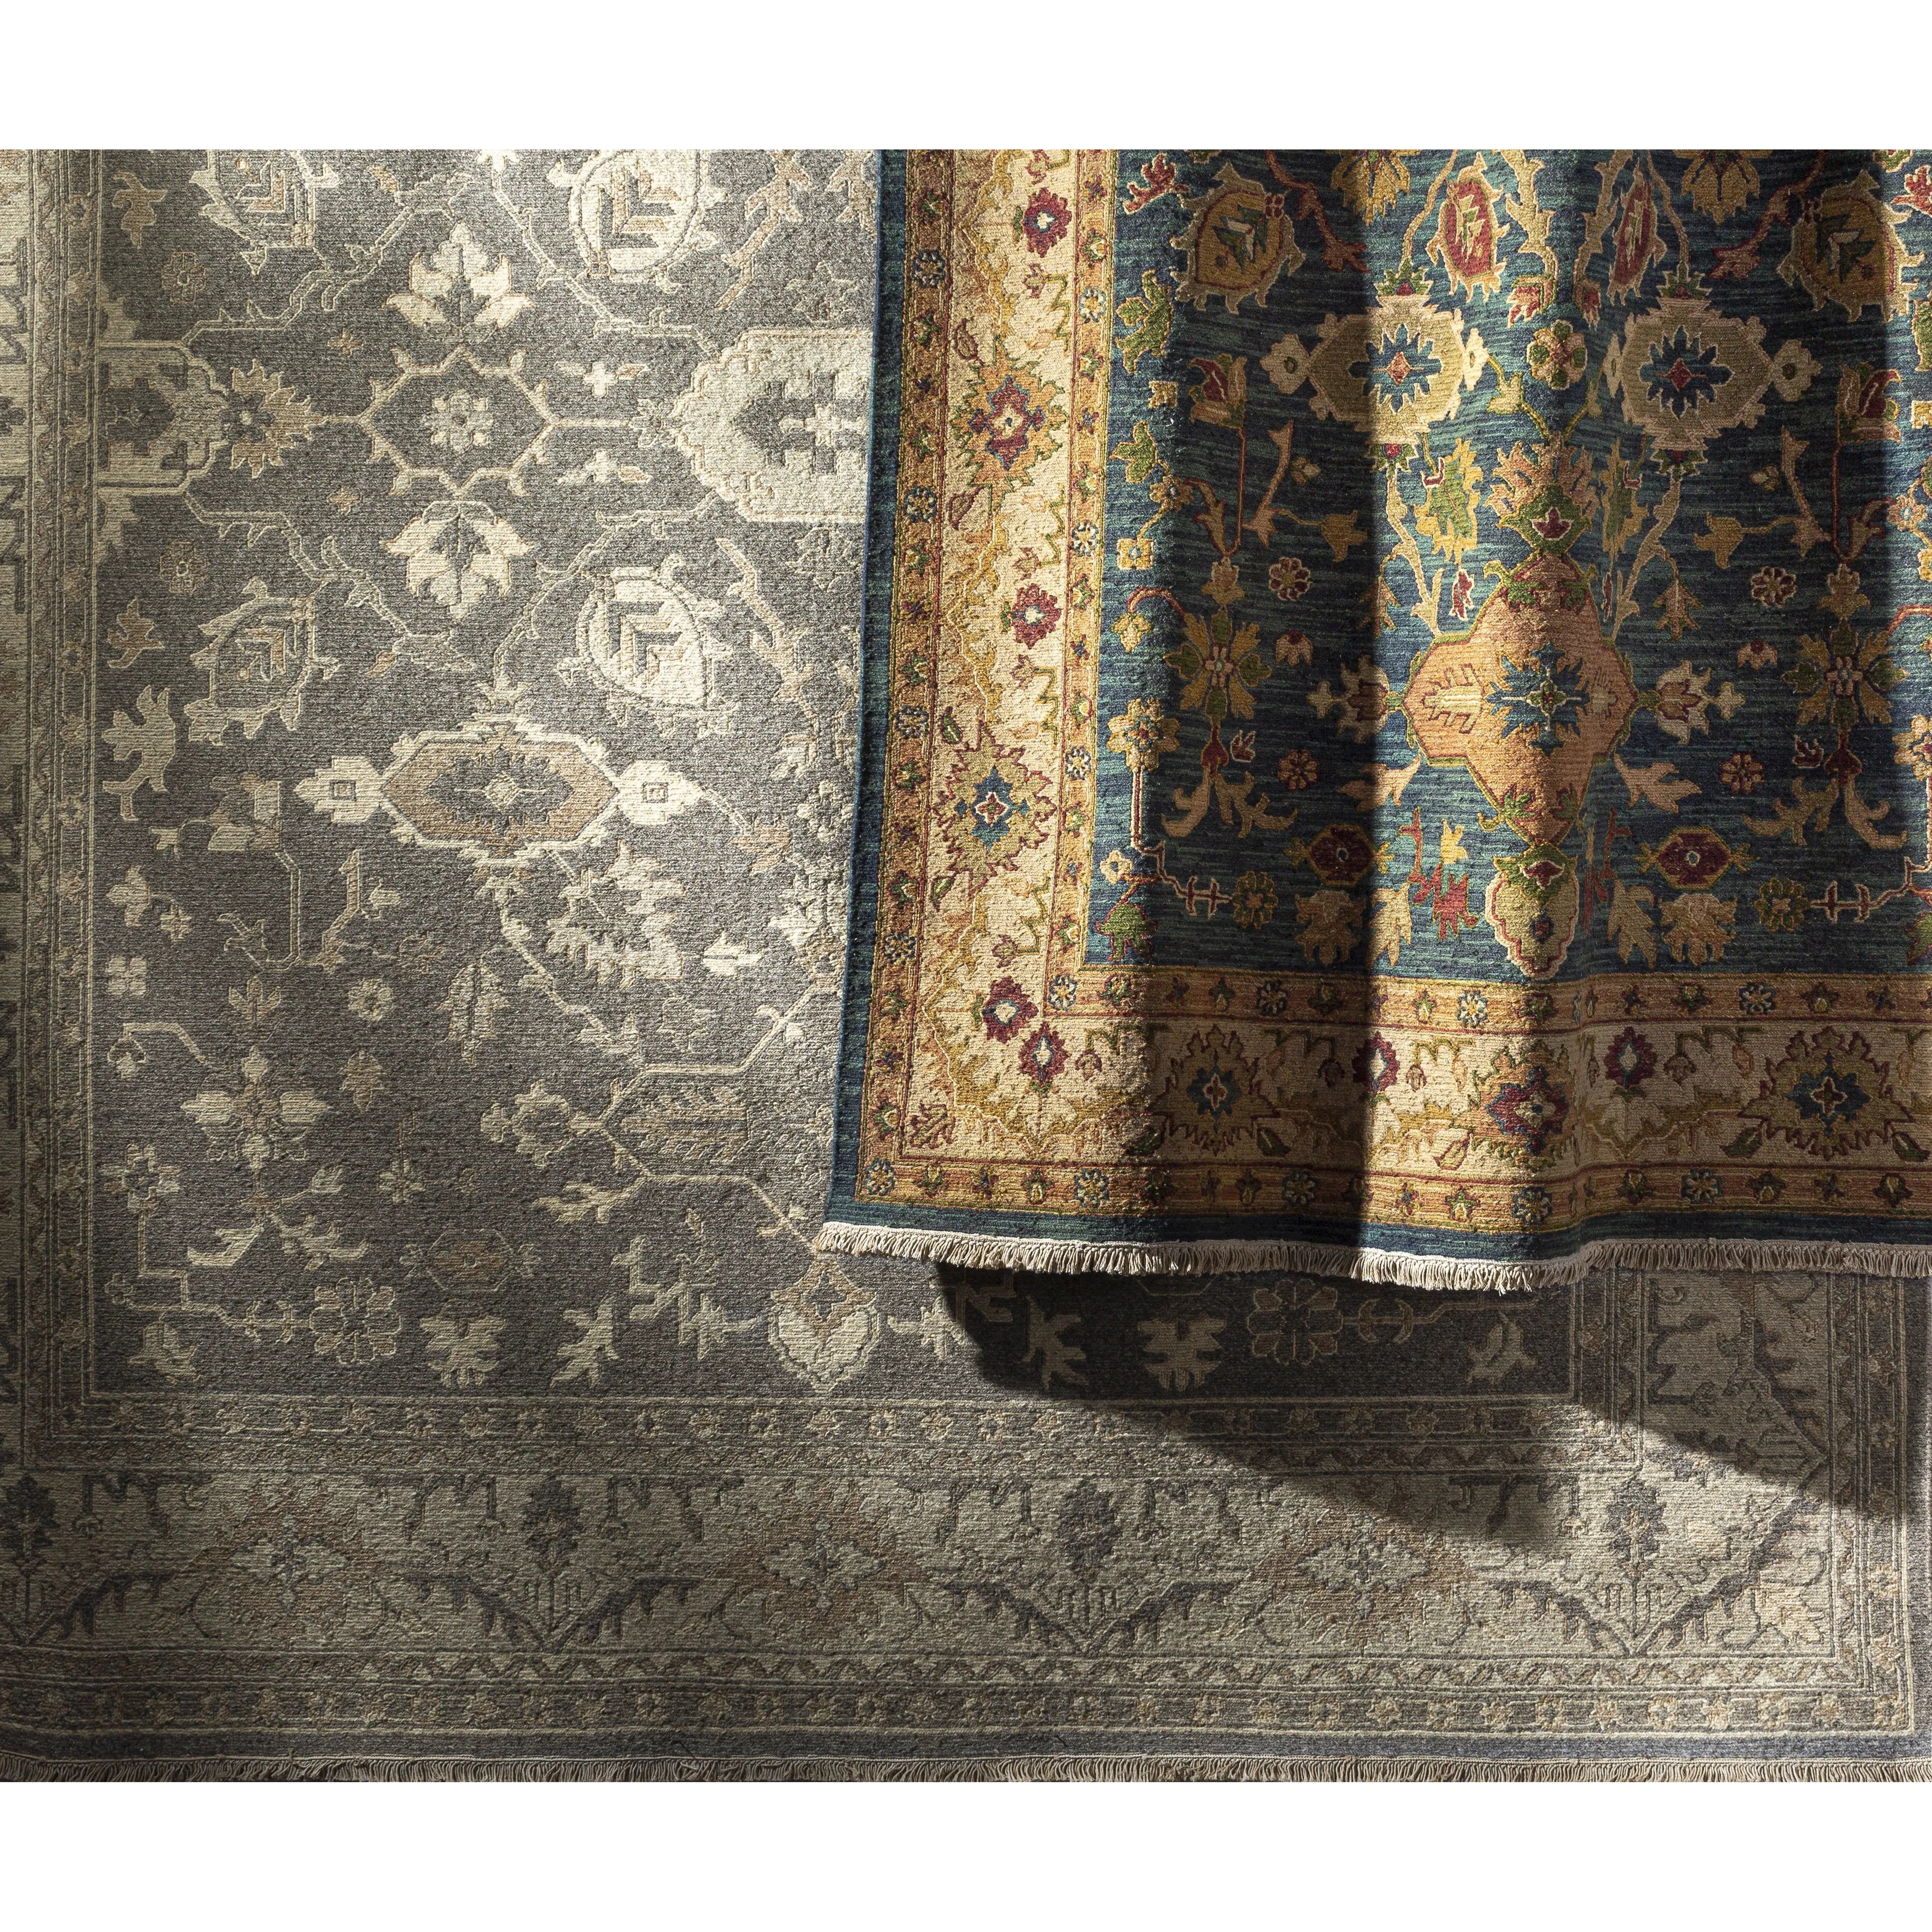 The Soumek Collection showcases traditional inspired designs that exemplify timeless styles of elegance, comfort, and sophistication. Amethyst Home provides interior design, new home construction design consulting, vintage area rugs, and lighting in the Newport Beach metro area.